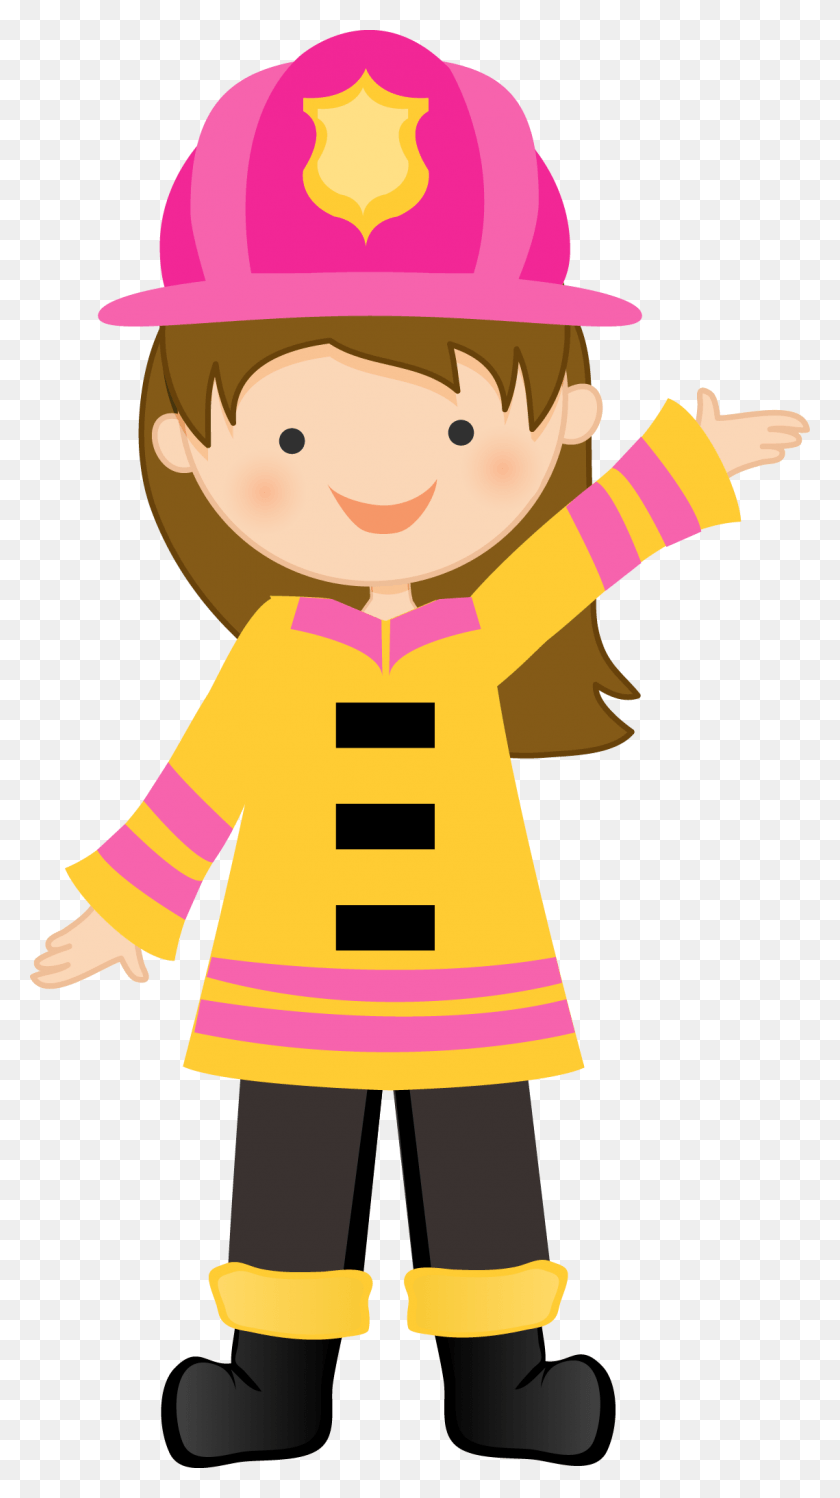 1139x2100 X 2100 2 Girl Firefighter Clipart, Persona, Humano, Ropa Hd Png